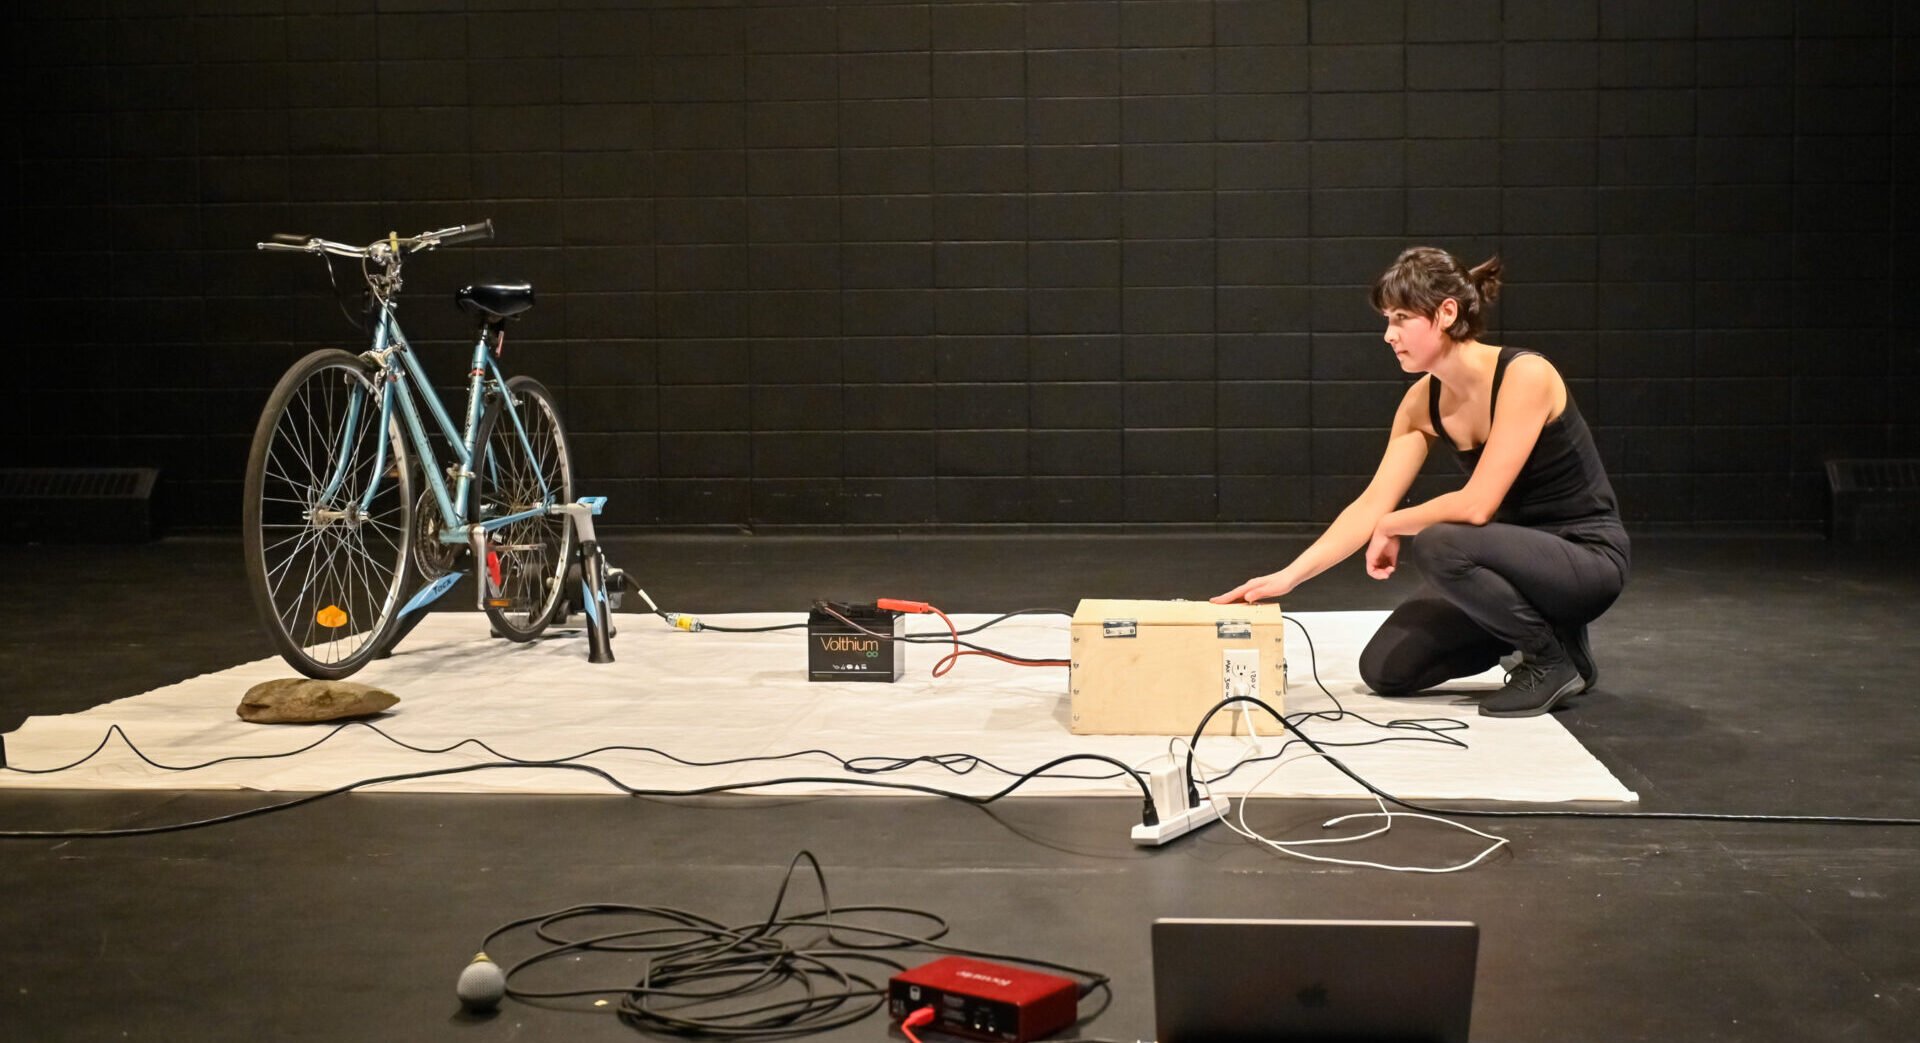 Photo features Mykalle Bienlinski on stage with tools and a bike on the far left.